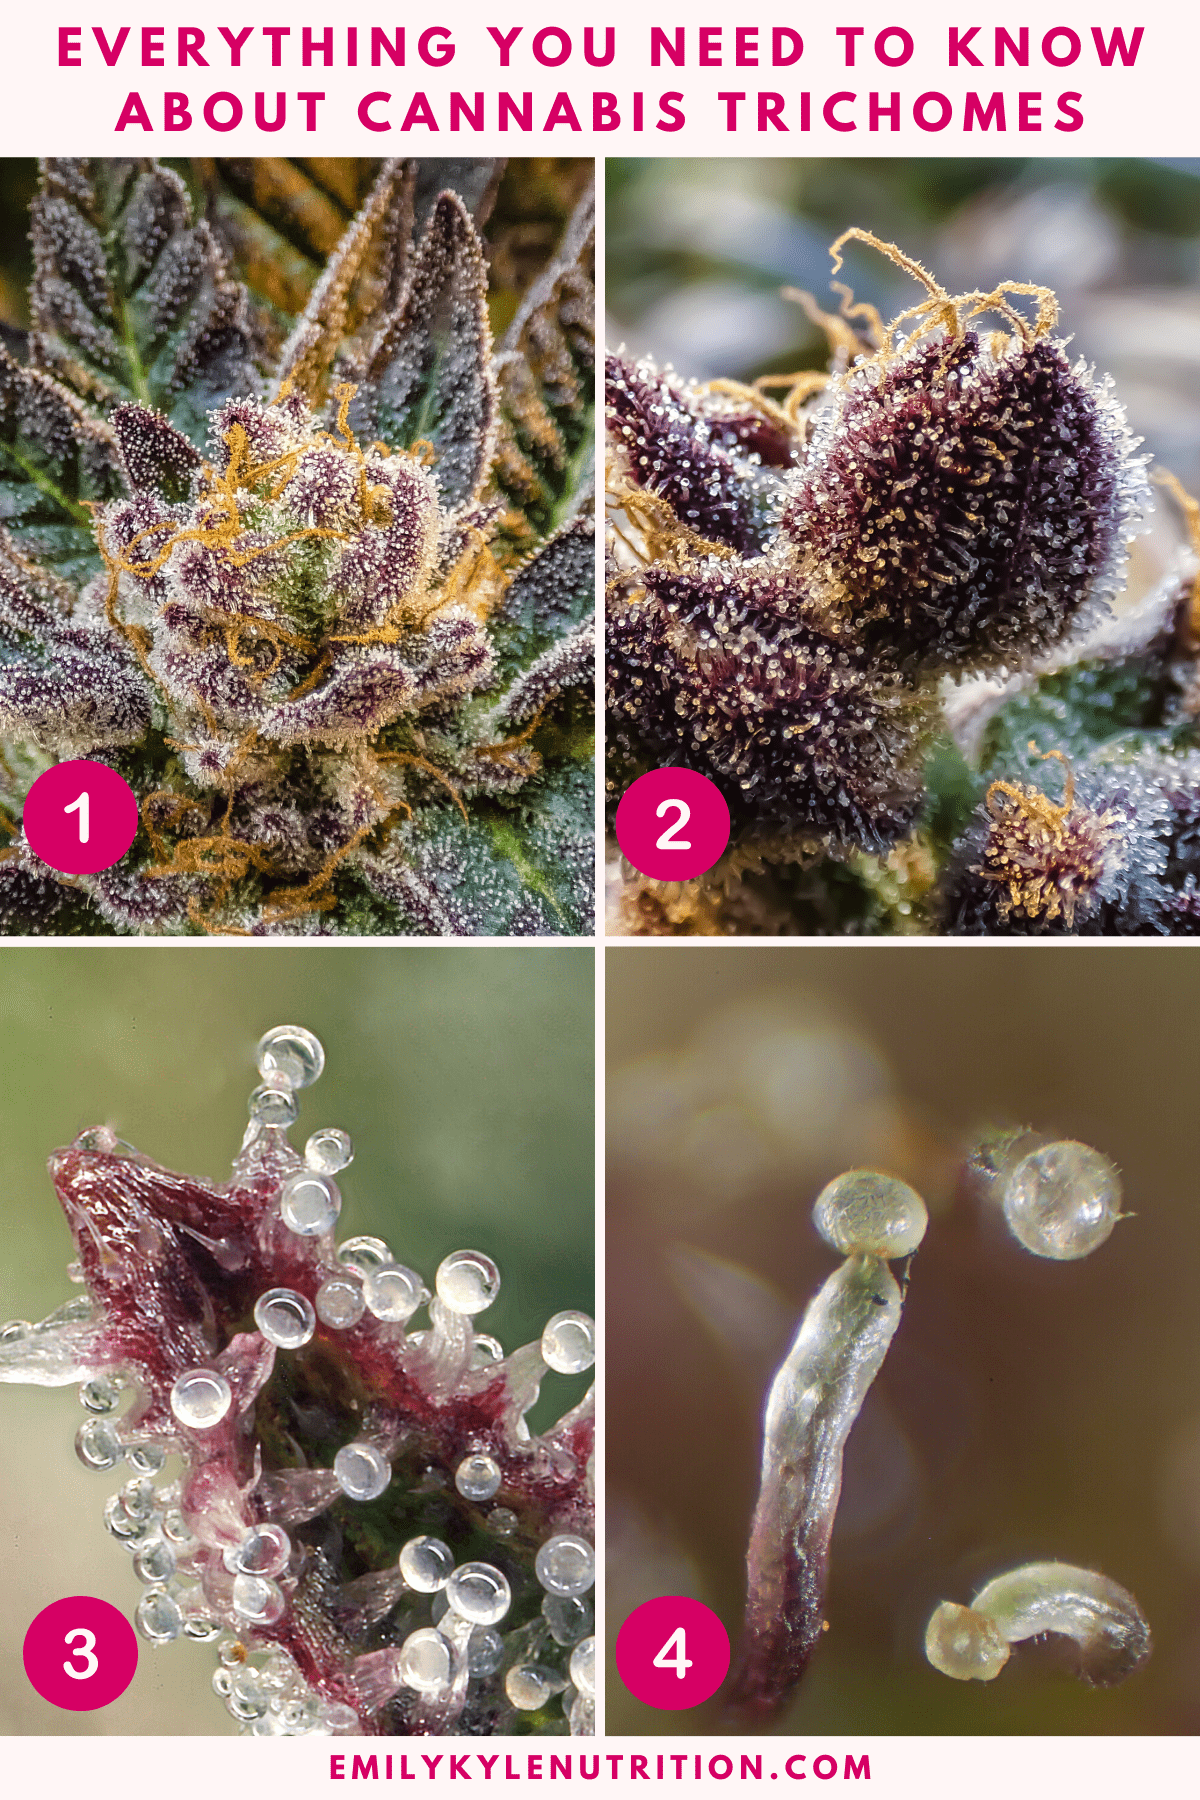 A image collage of four pictures all of a cannabis plant focusing in closer on the cannabis trichomes